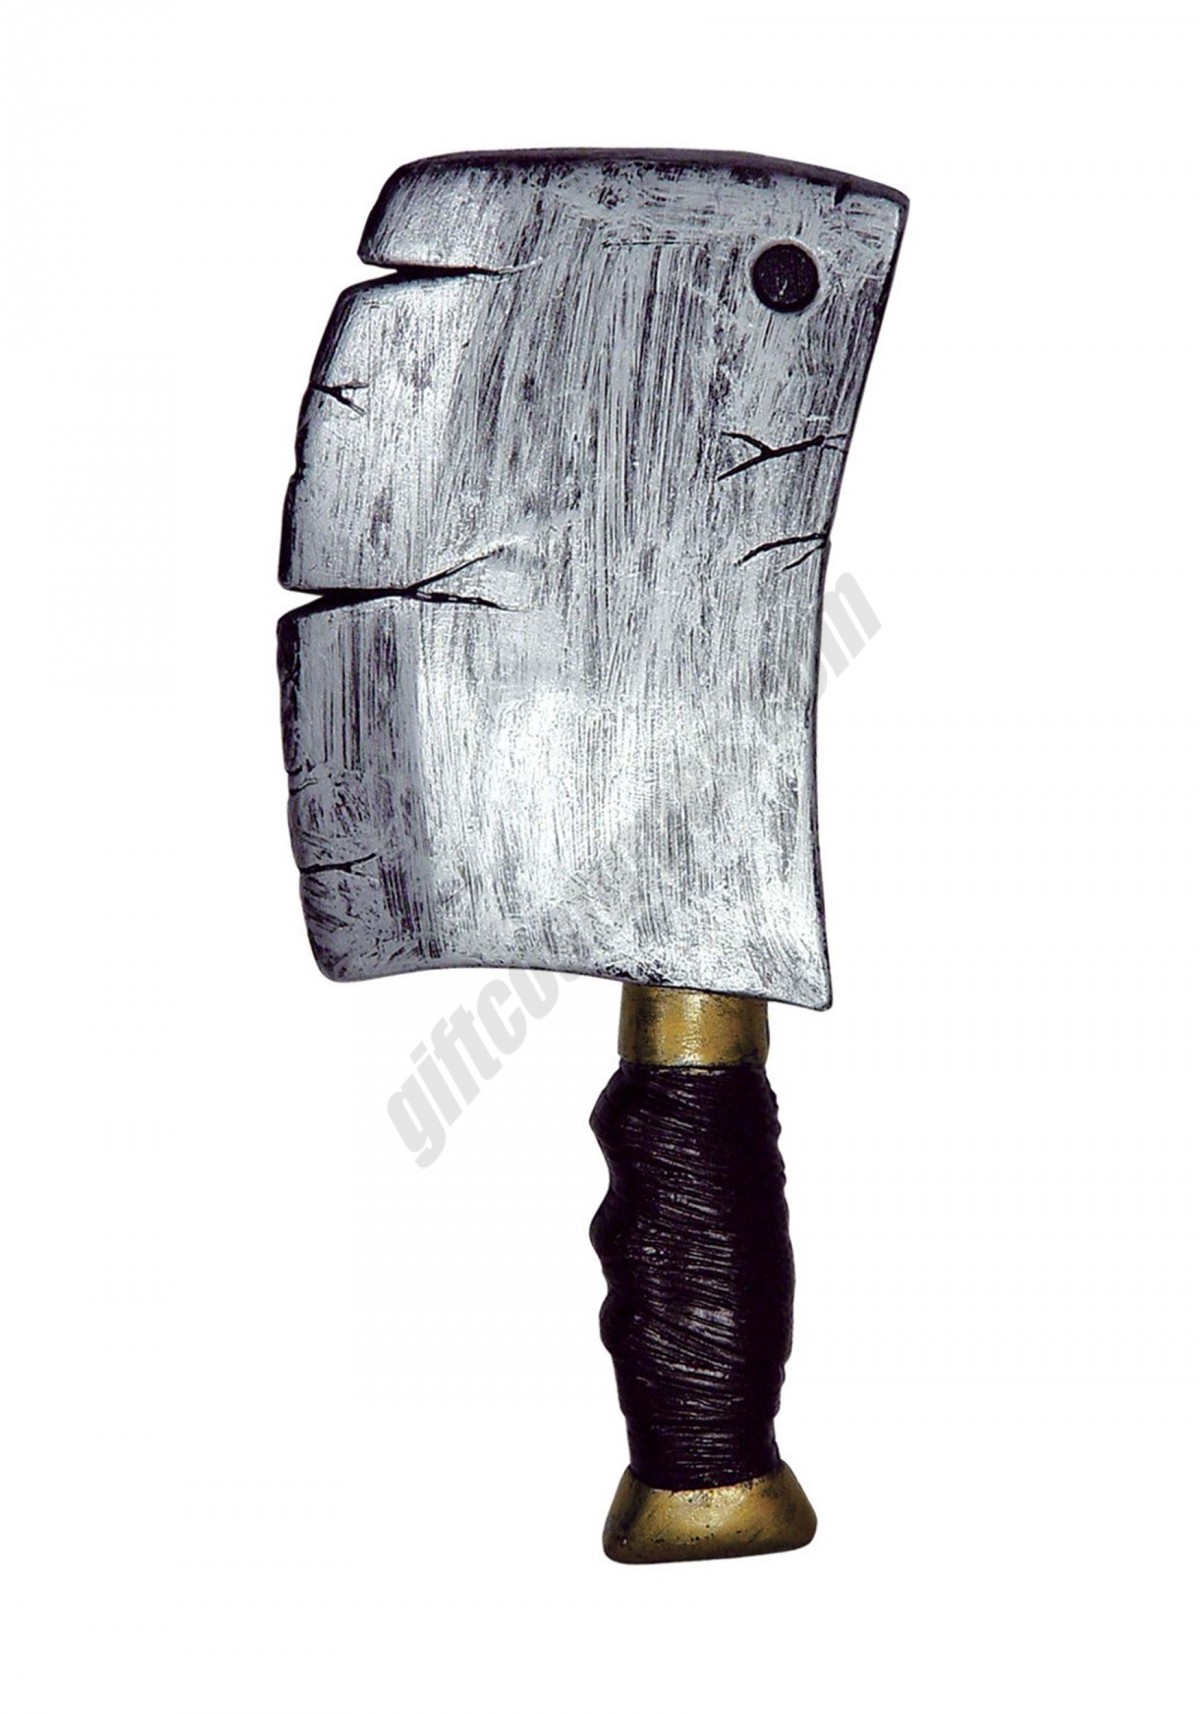 Deluxe Aged Cleaver Accessory Promotions - -0